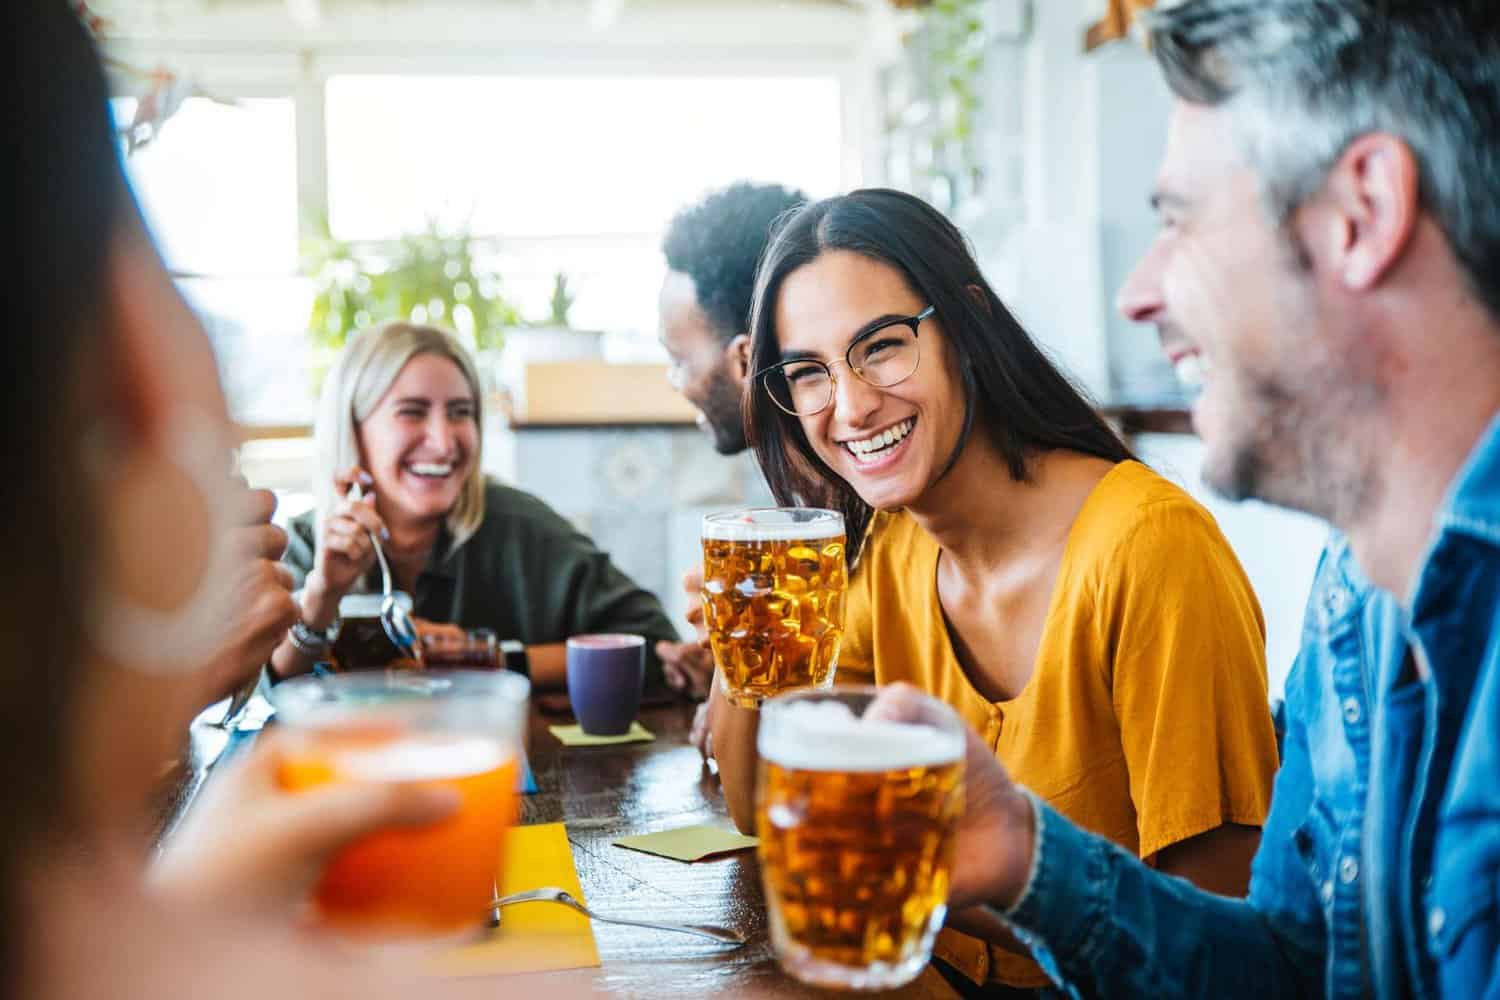 People enjoy pints of beer at a margaret river brewery